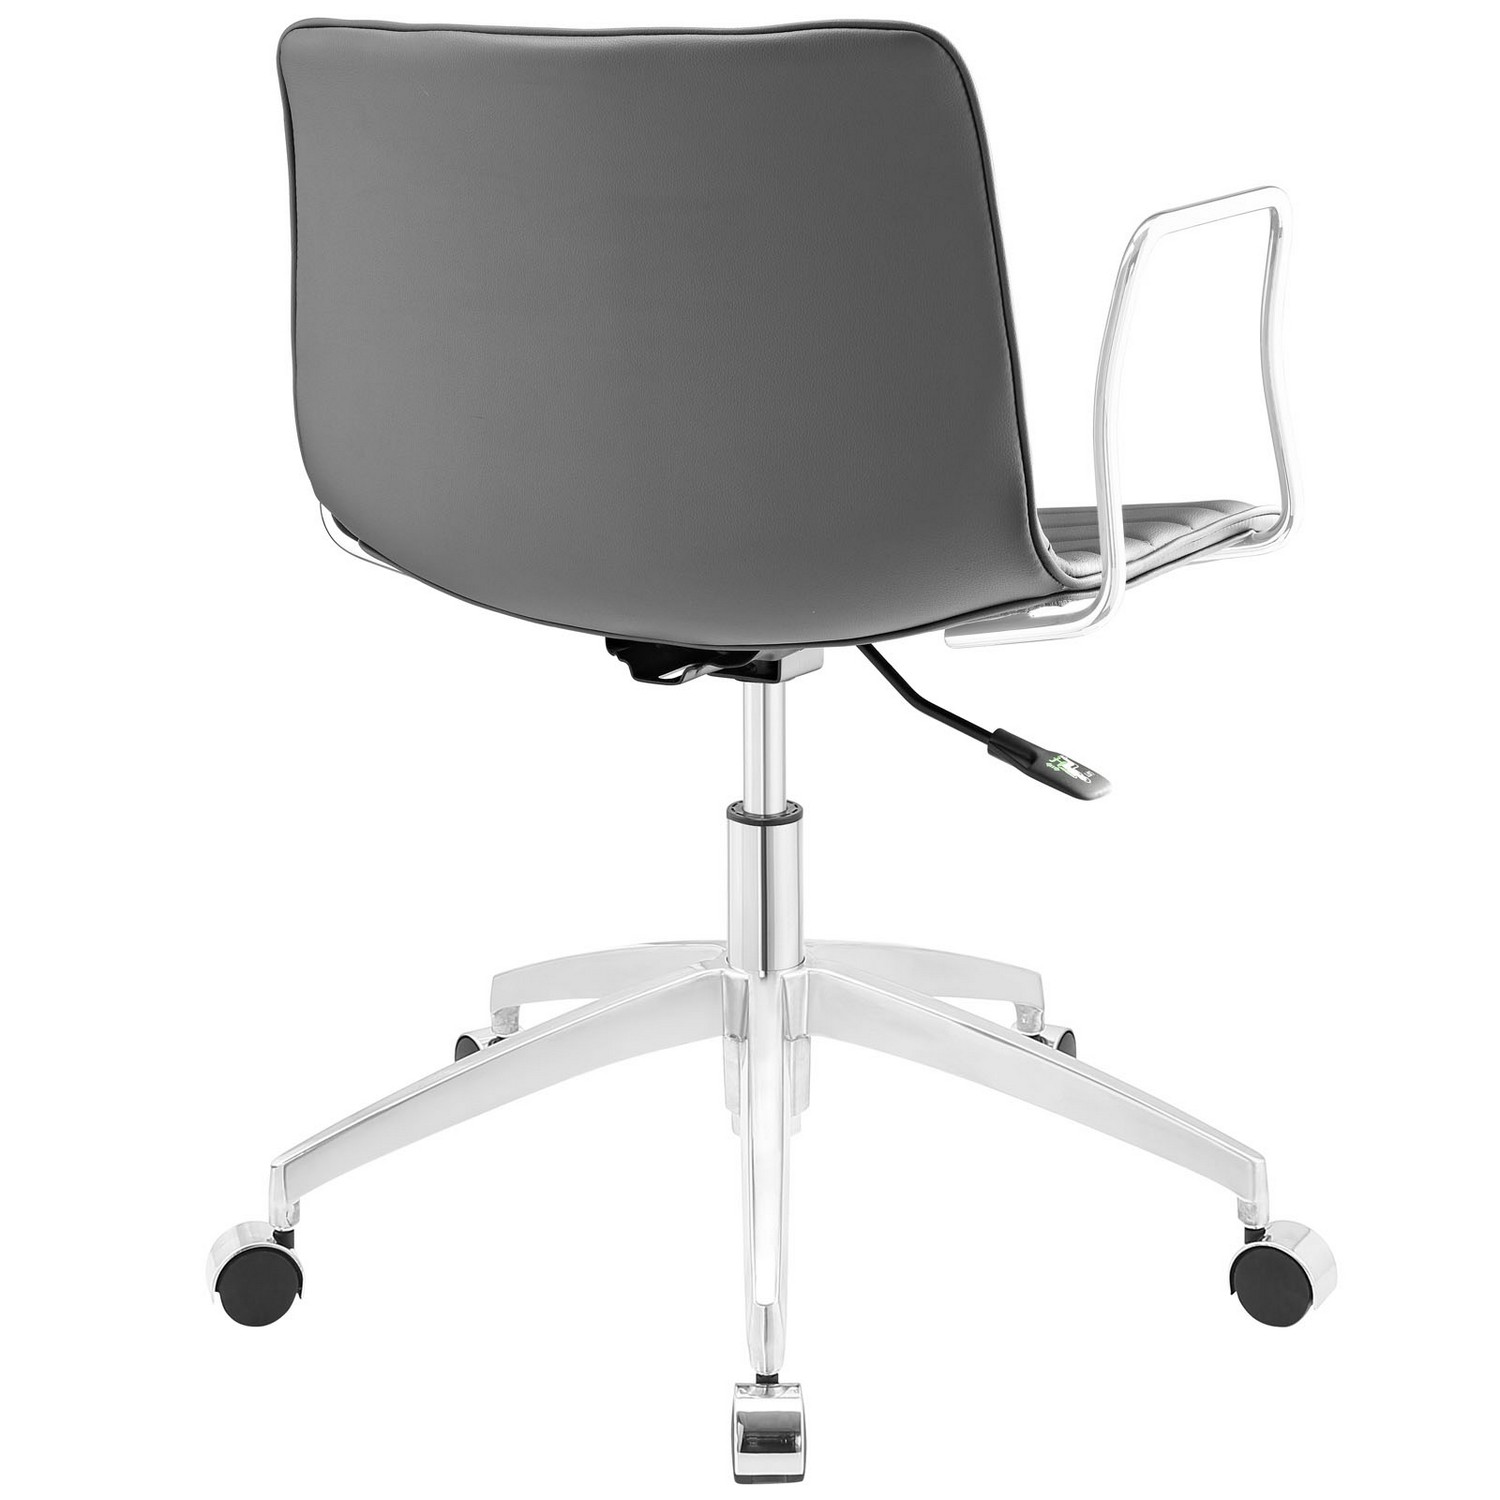 Modway Celerity Office Chair - Gray